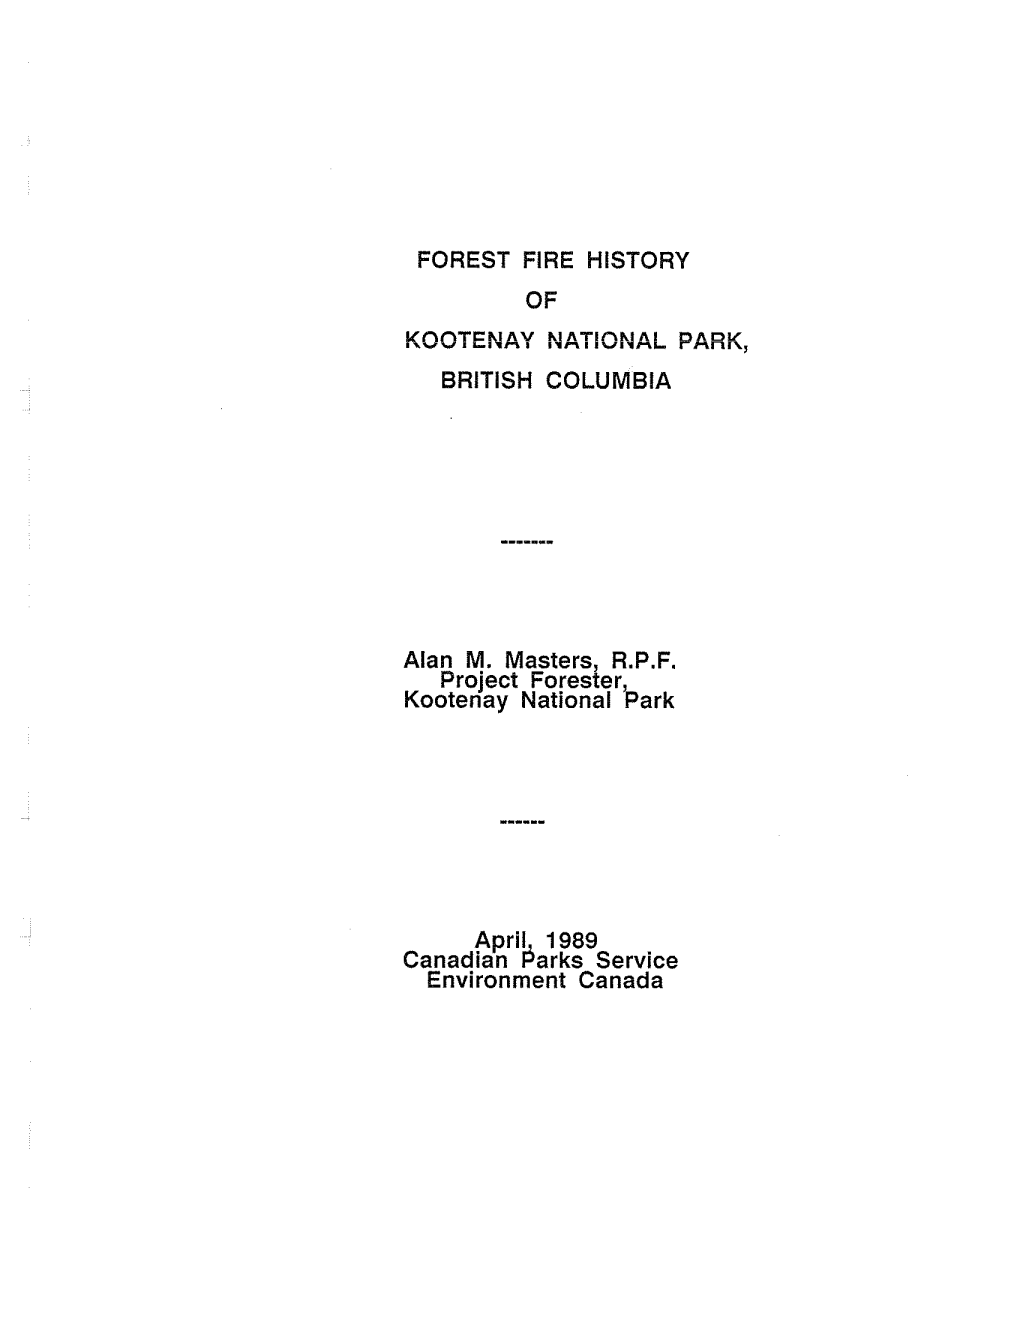 Forest Fire History of Kootenay National Park, British Columbia